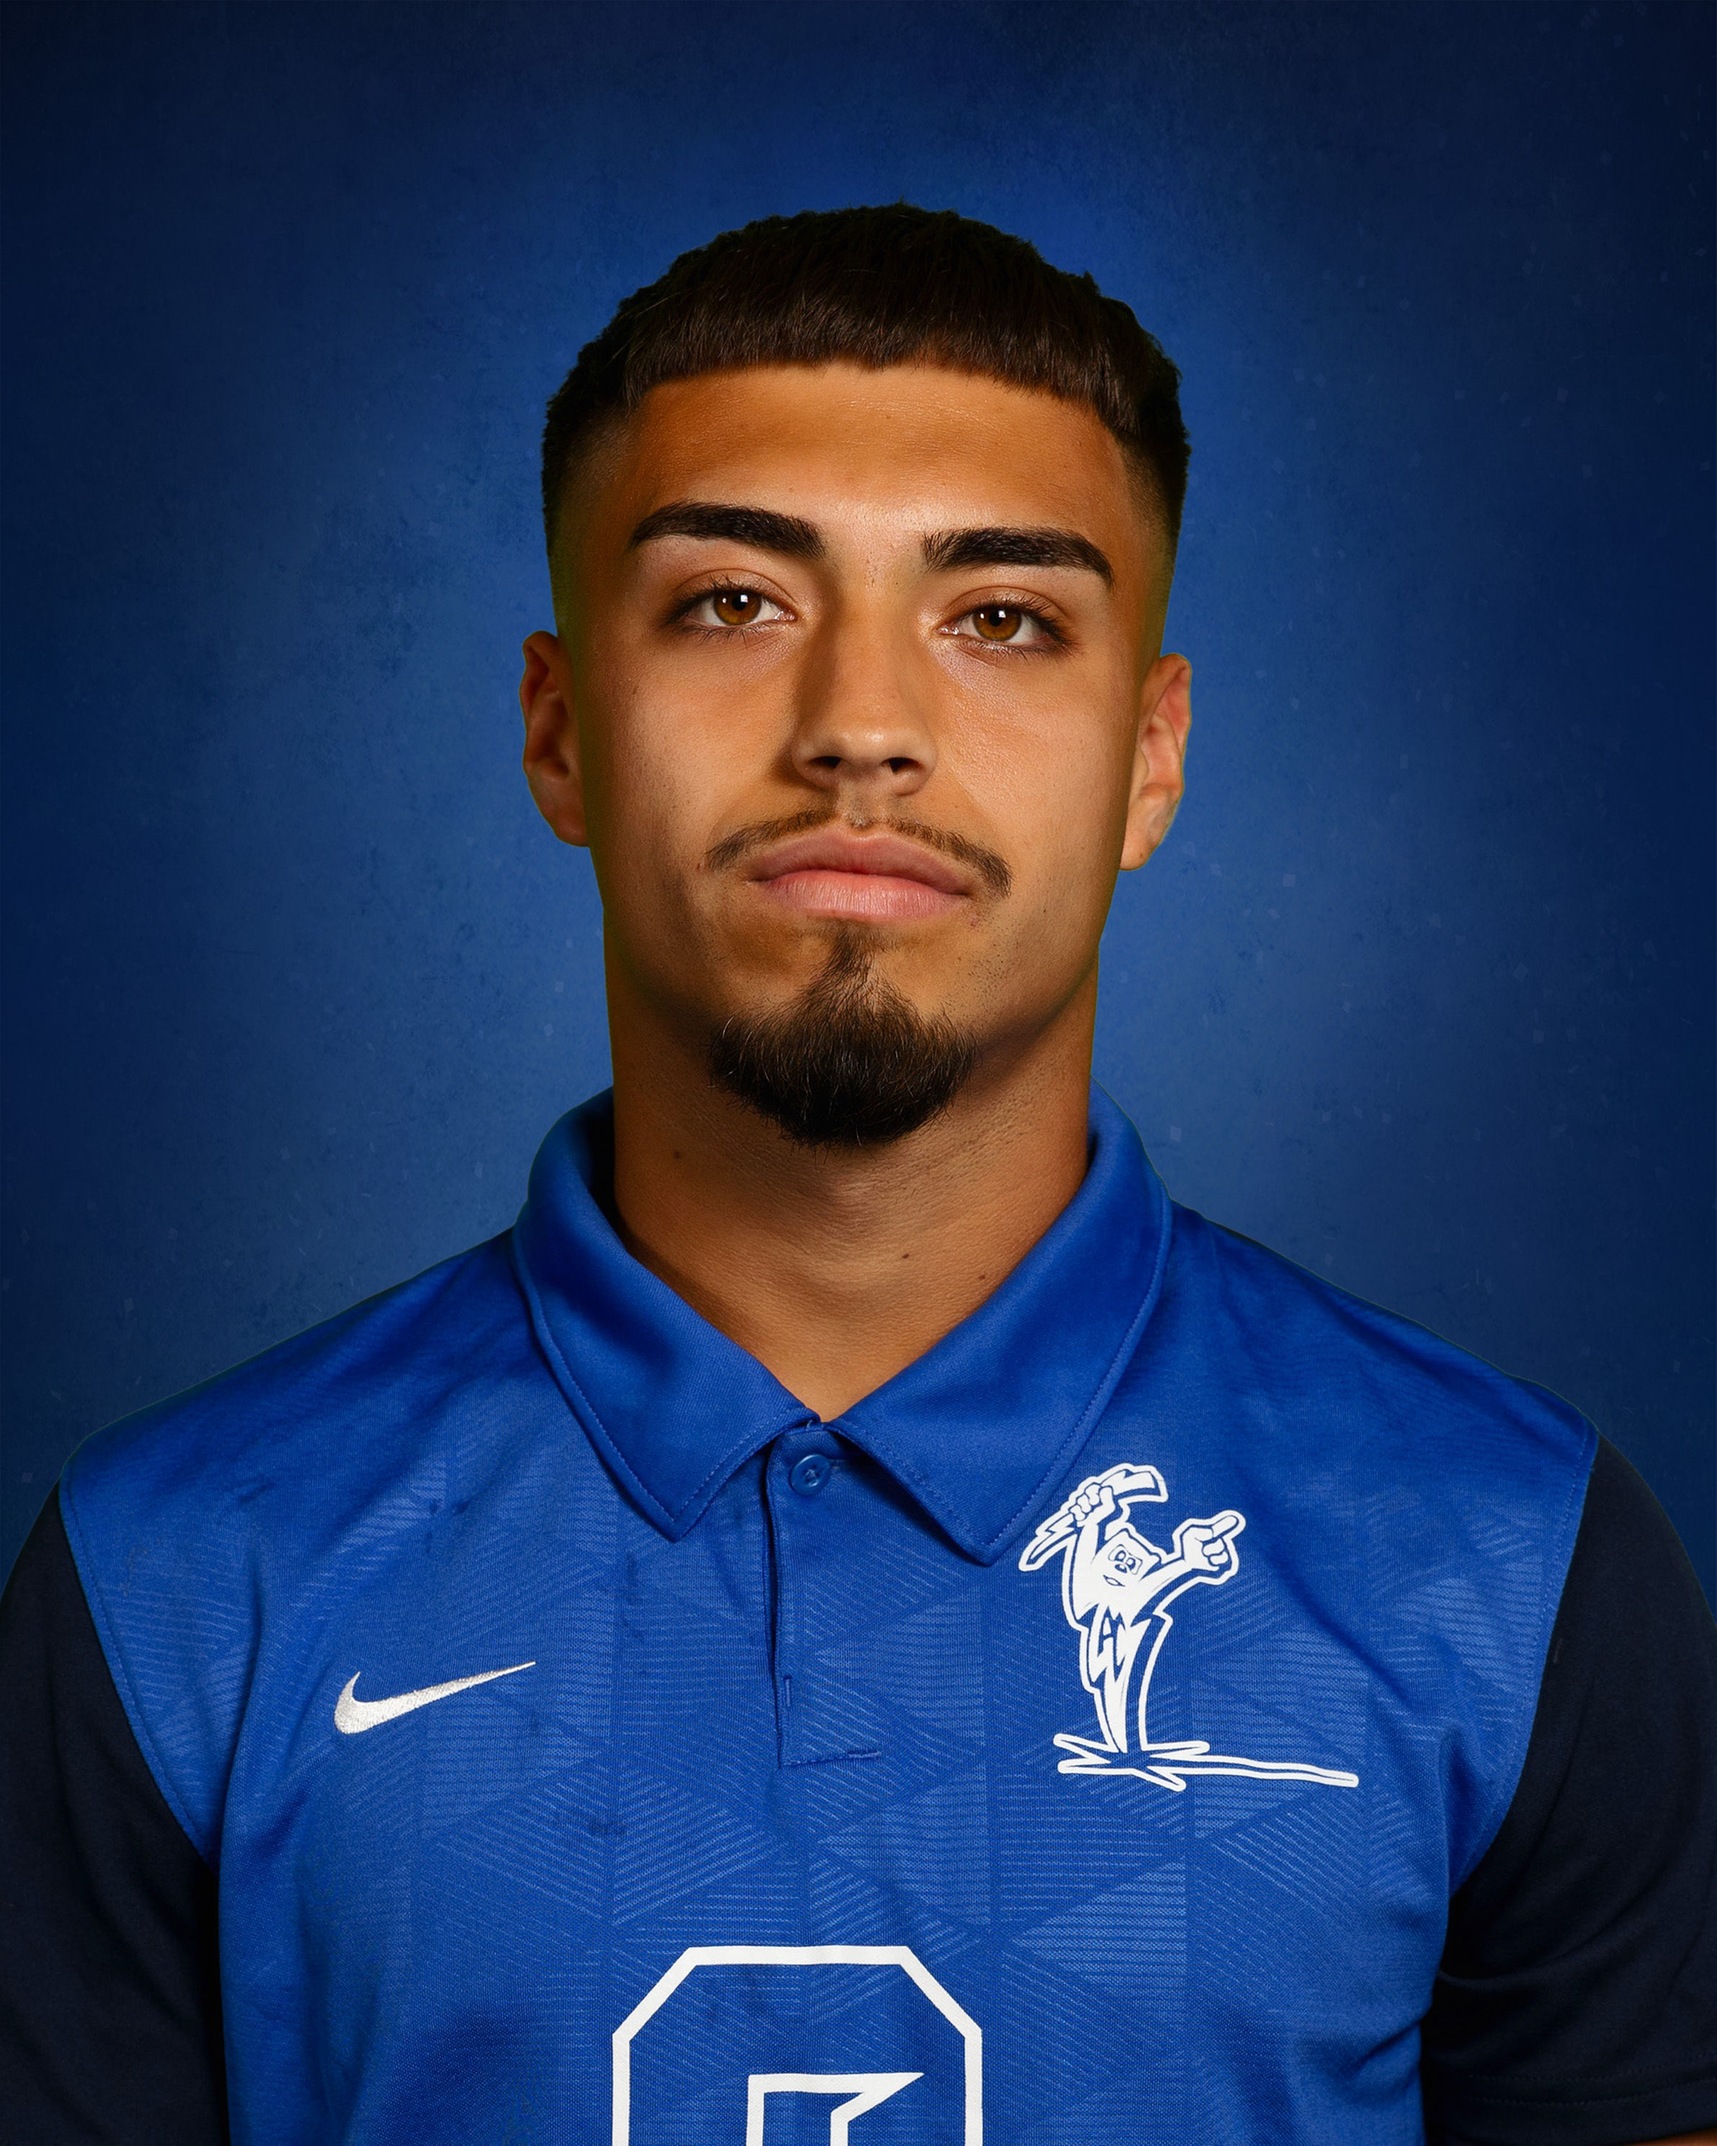 Kevin Cruz Named 1st Team All-Region and All-MCCAA, 3 Other Chargers Honored By MCCAA